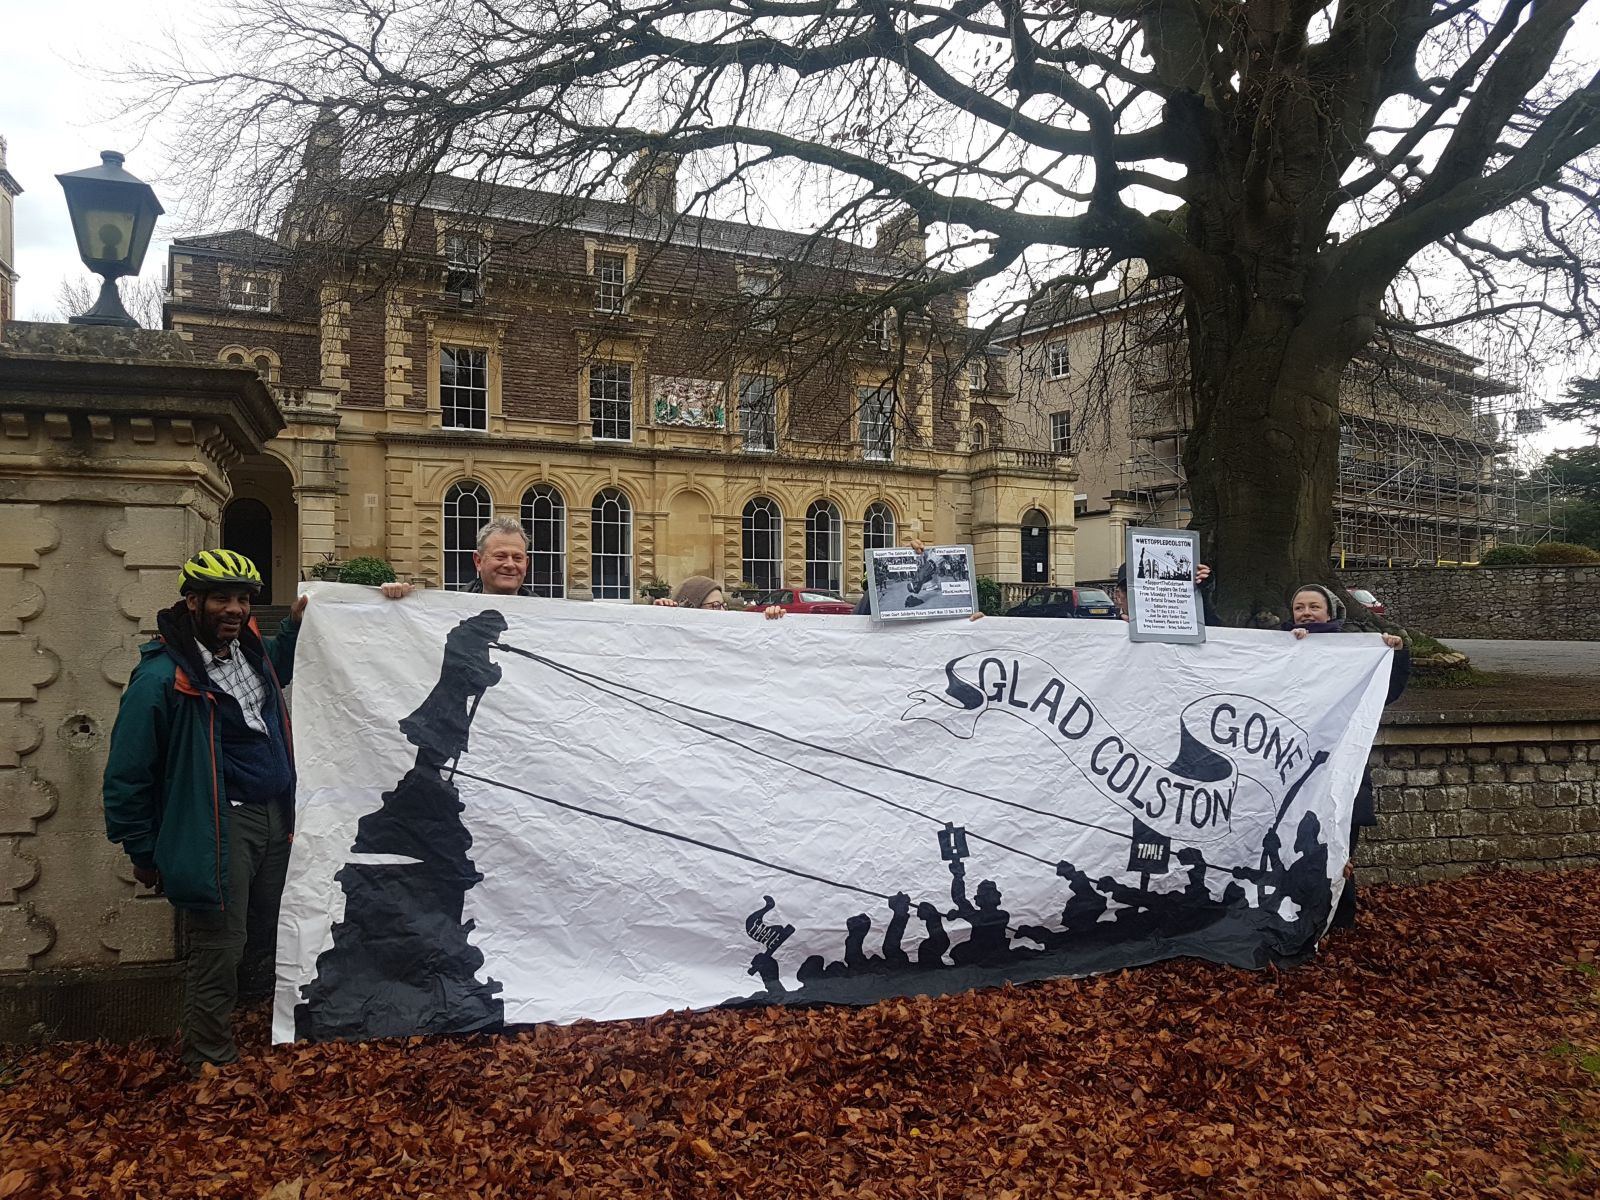 Seven people hold a large white banner with an image of Colston's statue being toppled. In theSeven people hold a large white banner with an image of Colston's statue being toppled. In the background is a mansion house. background is a mansion house.